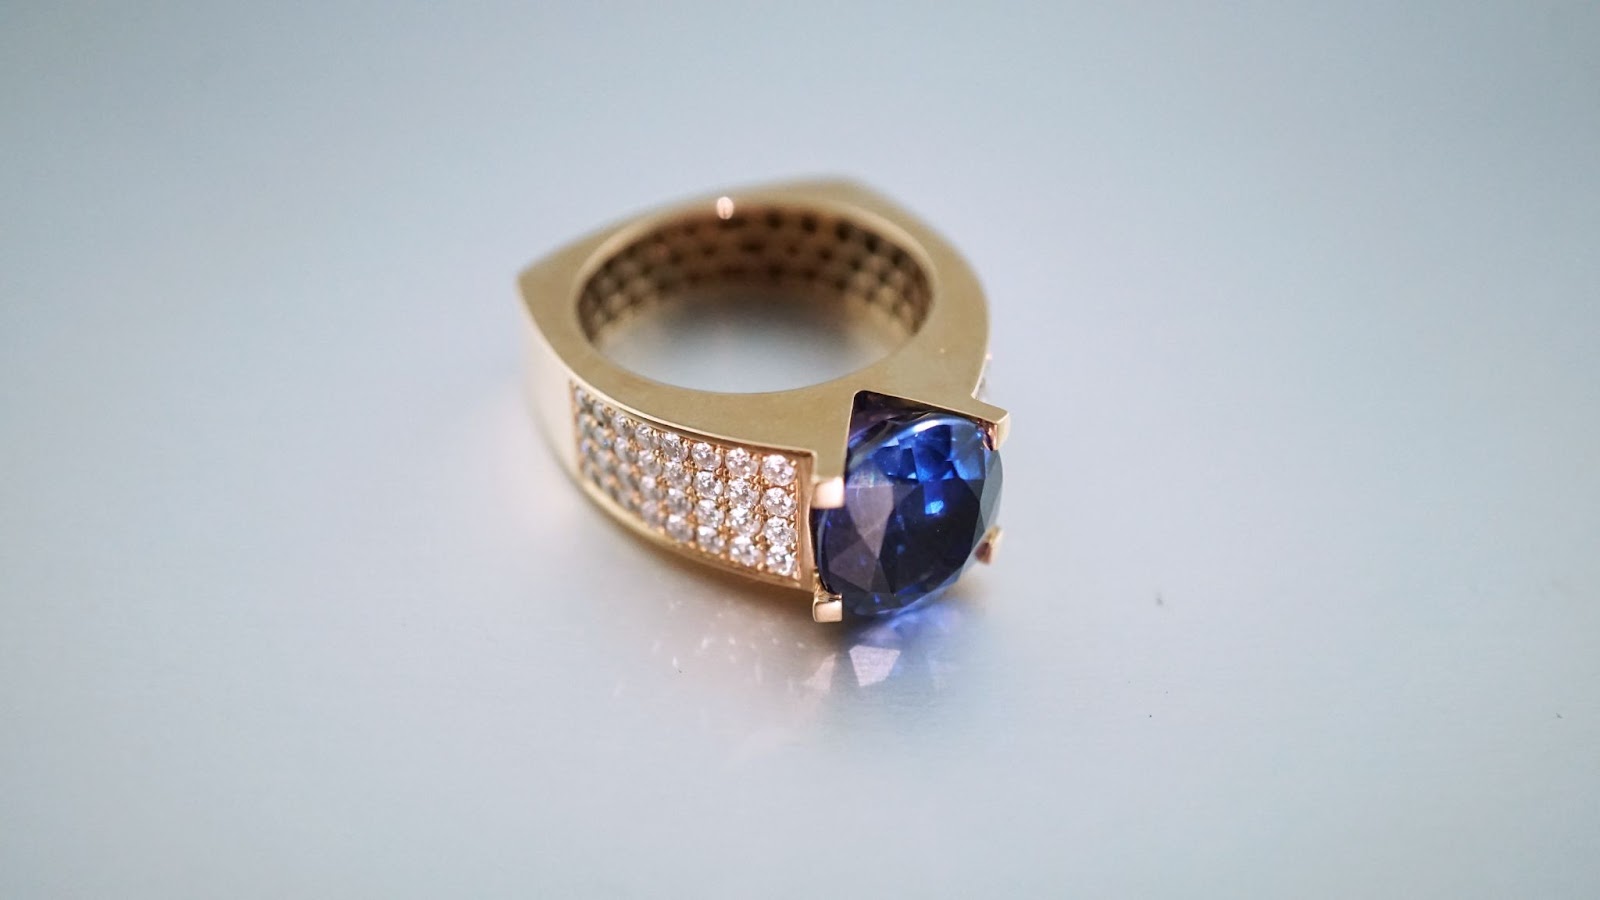 A yellow gold ring with a large sapphire and accented with diamond side stones